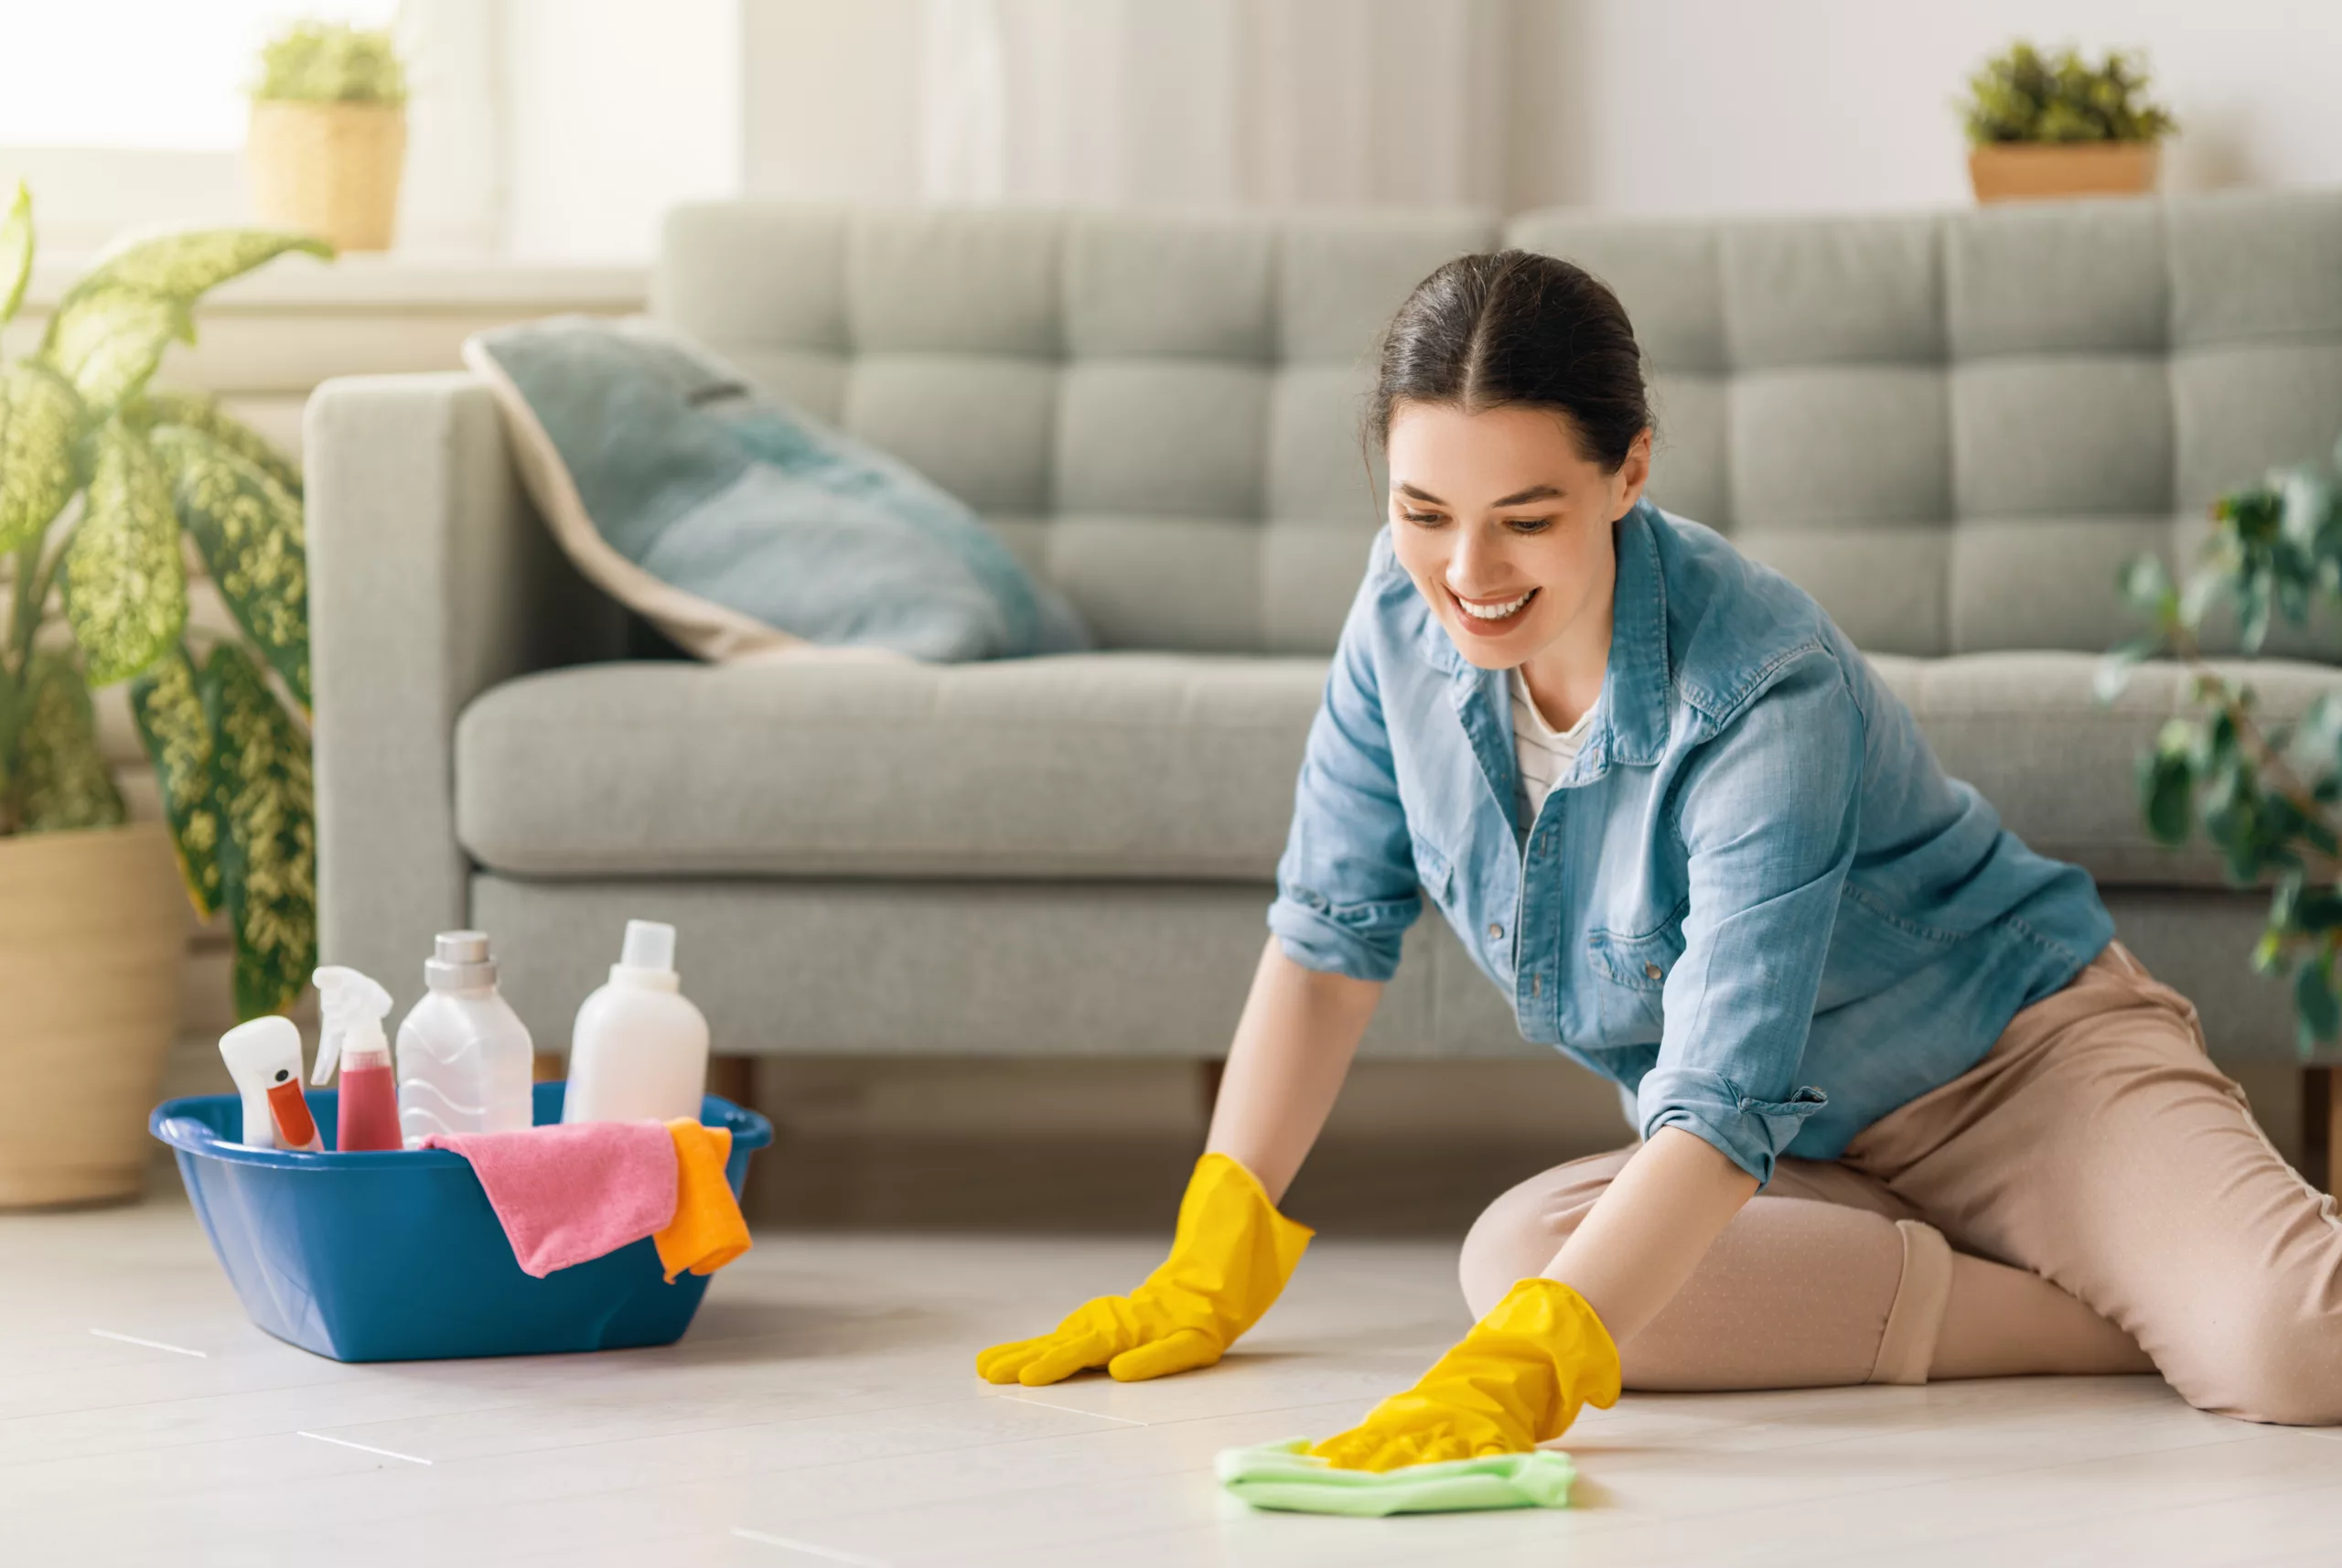 "Rosmar Cleaning Services LLC offers services of Residential Cleaning, House Cleaning, Deep Cleaning, Move Out - In , Airbnb Cleaning, Construction Cleaning, Office Cleaning, Commercial Cleaning in Tampa, FL, Land O' Lakes, FL, Brandon, FL, St. Petersburg, FL, Wesley Chapel, FL, Lutz, FL, Riverview, FL, Odessa, FL, Clearwater, FL, Valrico, FL, Plant City, FL - Residential Cleaning"